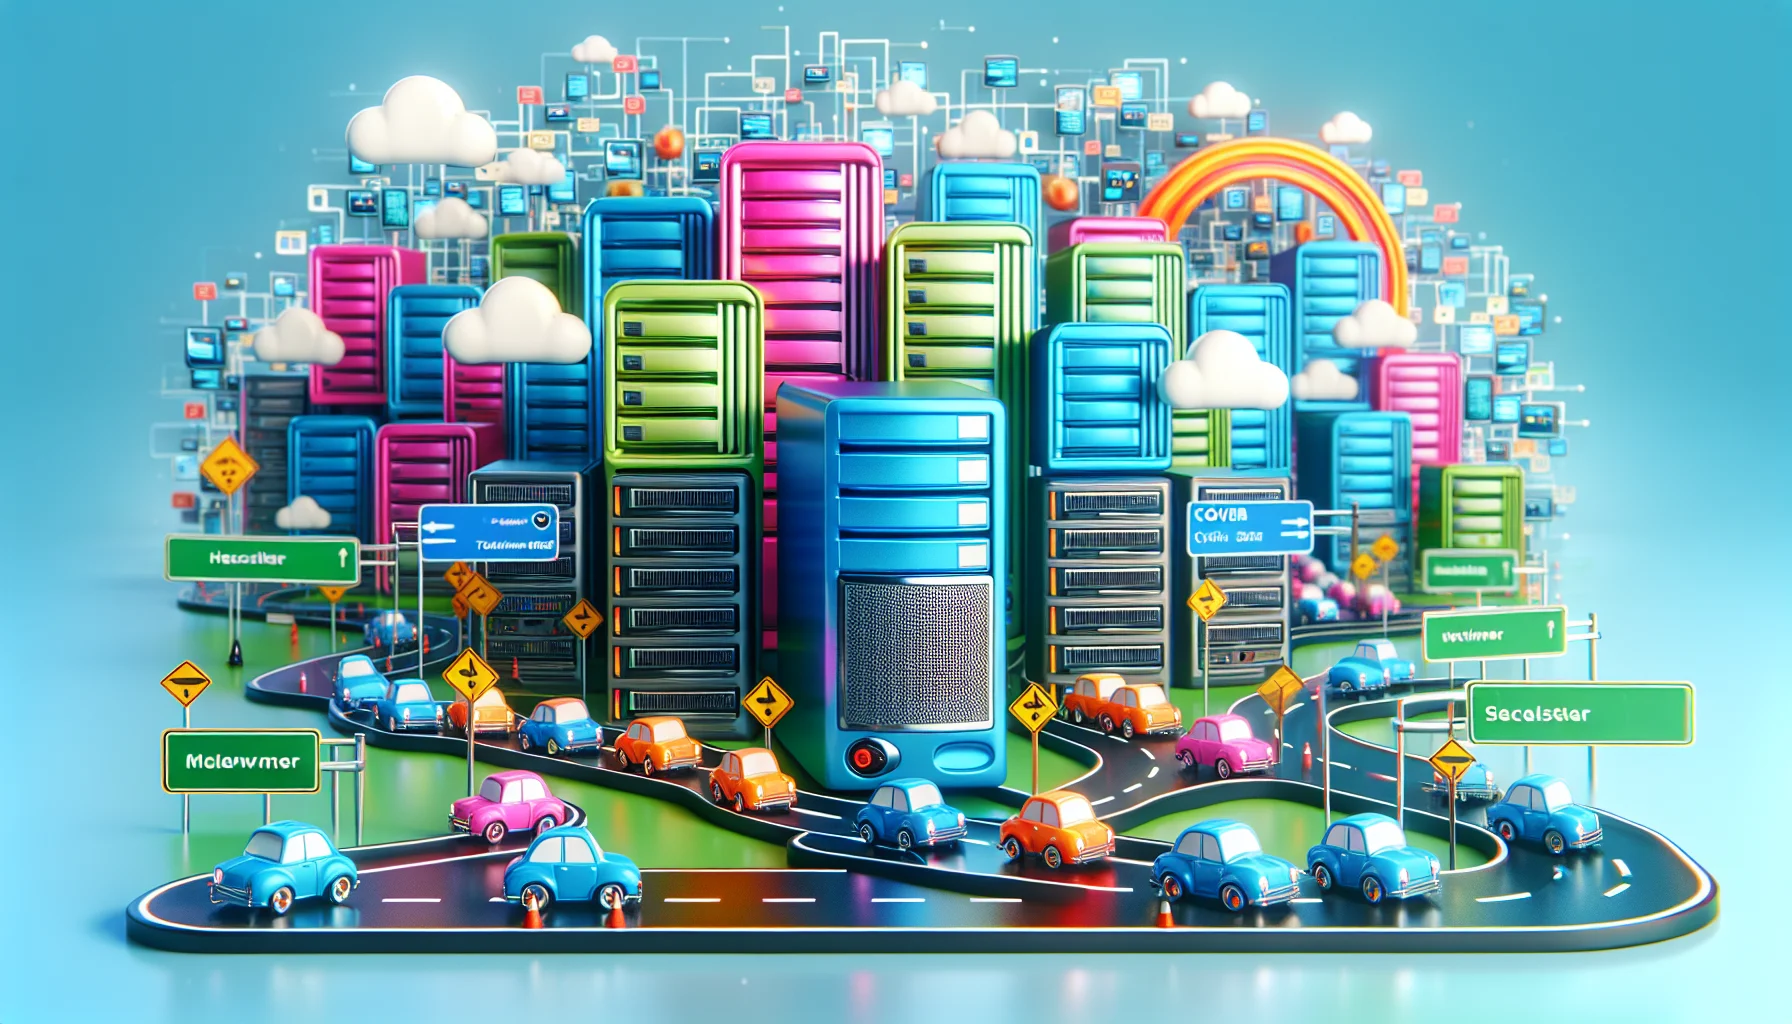 Create an innovative and playful scene showcasing the concept of reseller hosting. The scene could have multiple data servers represented as vibrant-colored, large metallic boxes, constantly on the go on tiny wheels, busily hosting websites. There might be road signs and traffic signals directing them. A supercomputer, symbolizing the reseller, could be seen handling the traffic with ease while appearing overwhelmed in a humorous way. A backdrop of an abstract internet cityscape further sets the mood. This scene alludes to the efficiency and dynamism of inmotion reseller hosting service.